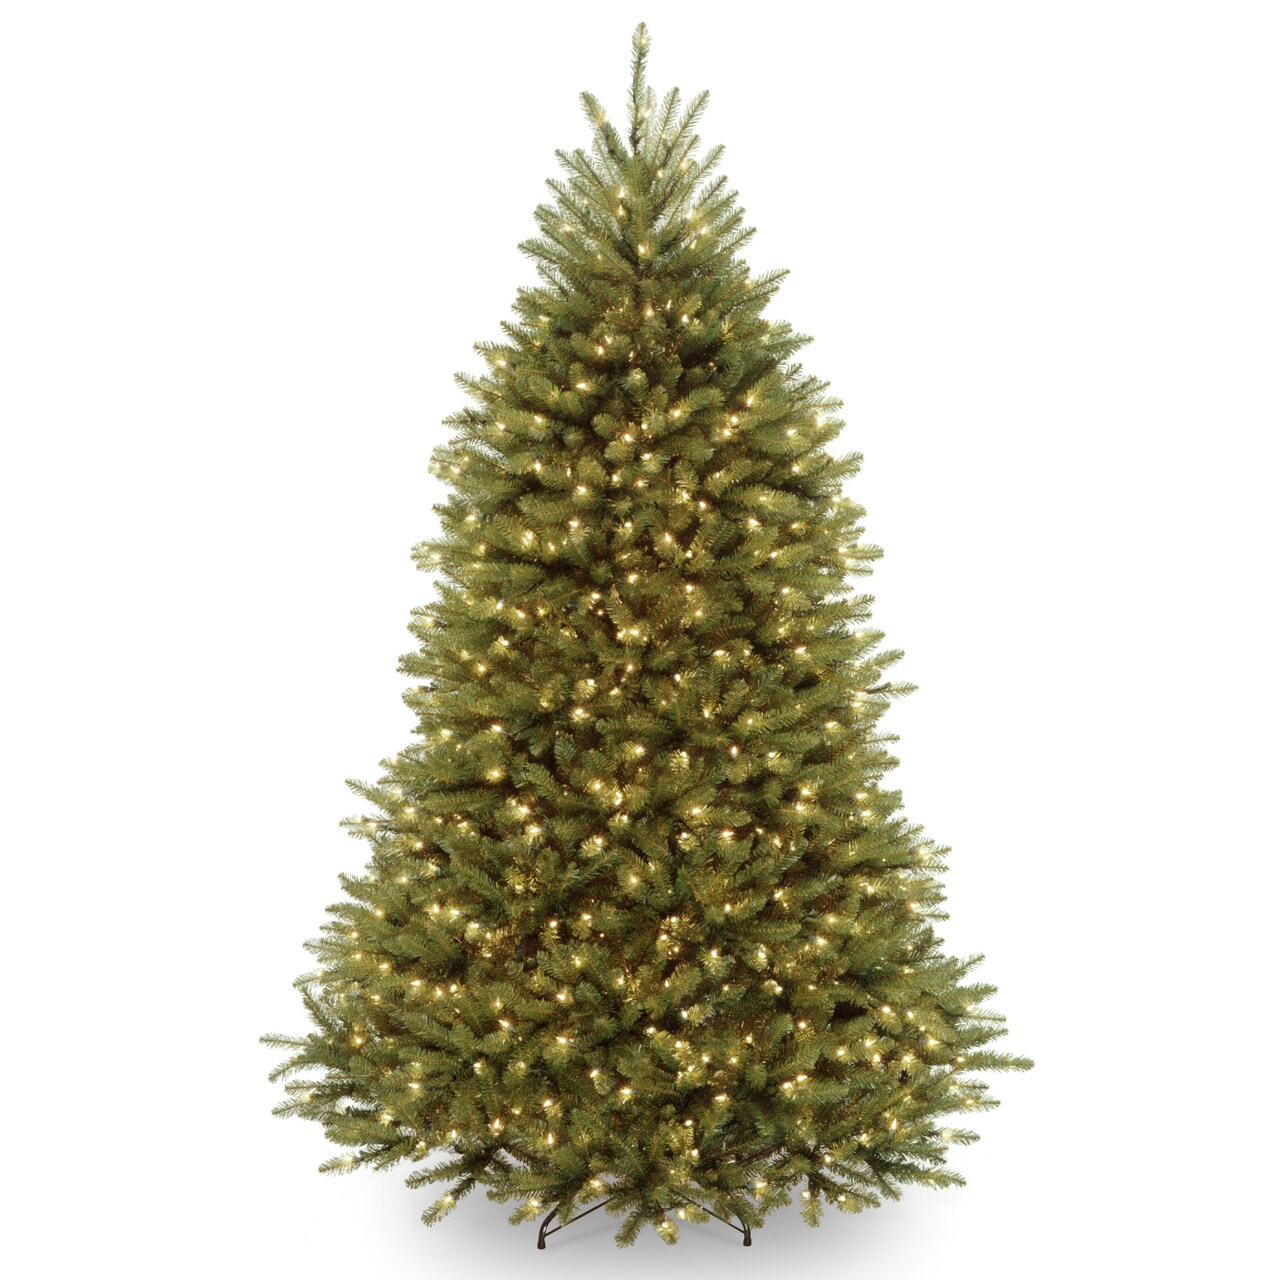 National Tree Company Pre-Lit Artificial Full Christmas Tree, Green, Dunhill Fir, Dual Color LED Lights, Includes PowerConnect and Stand, 7 Feet